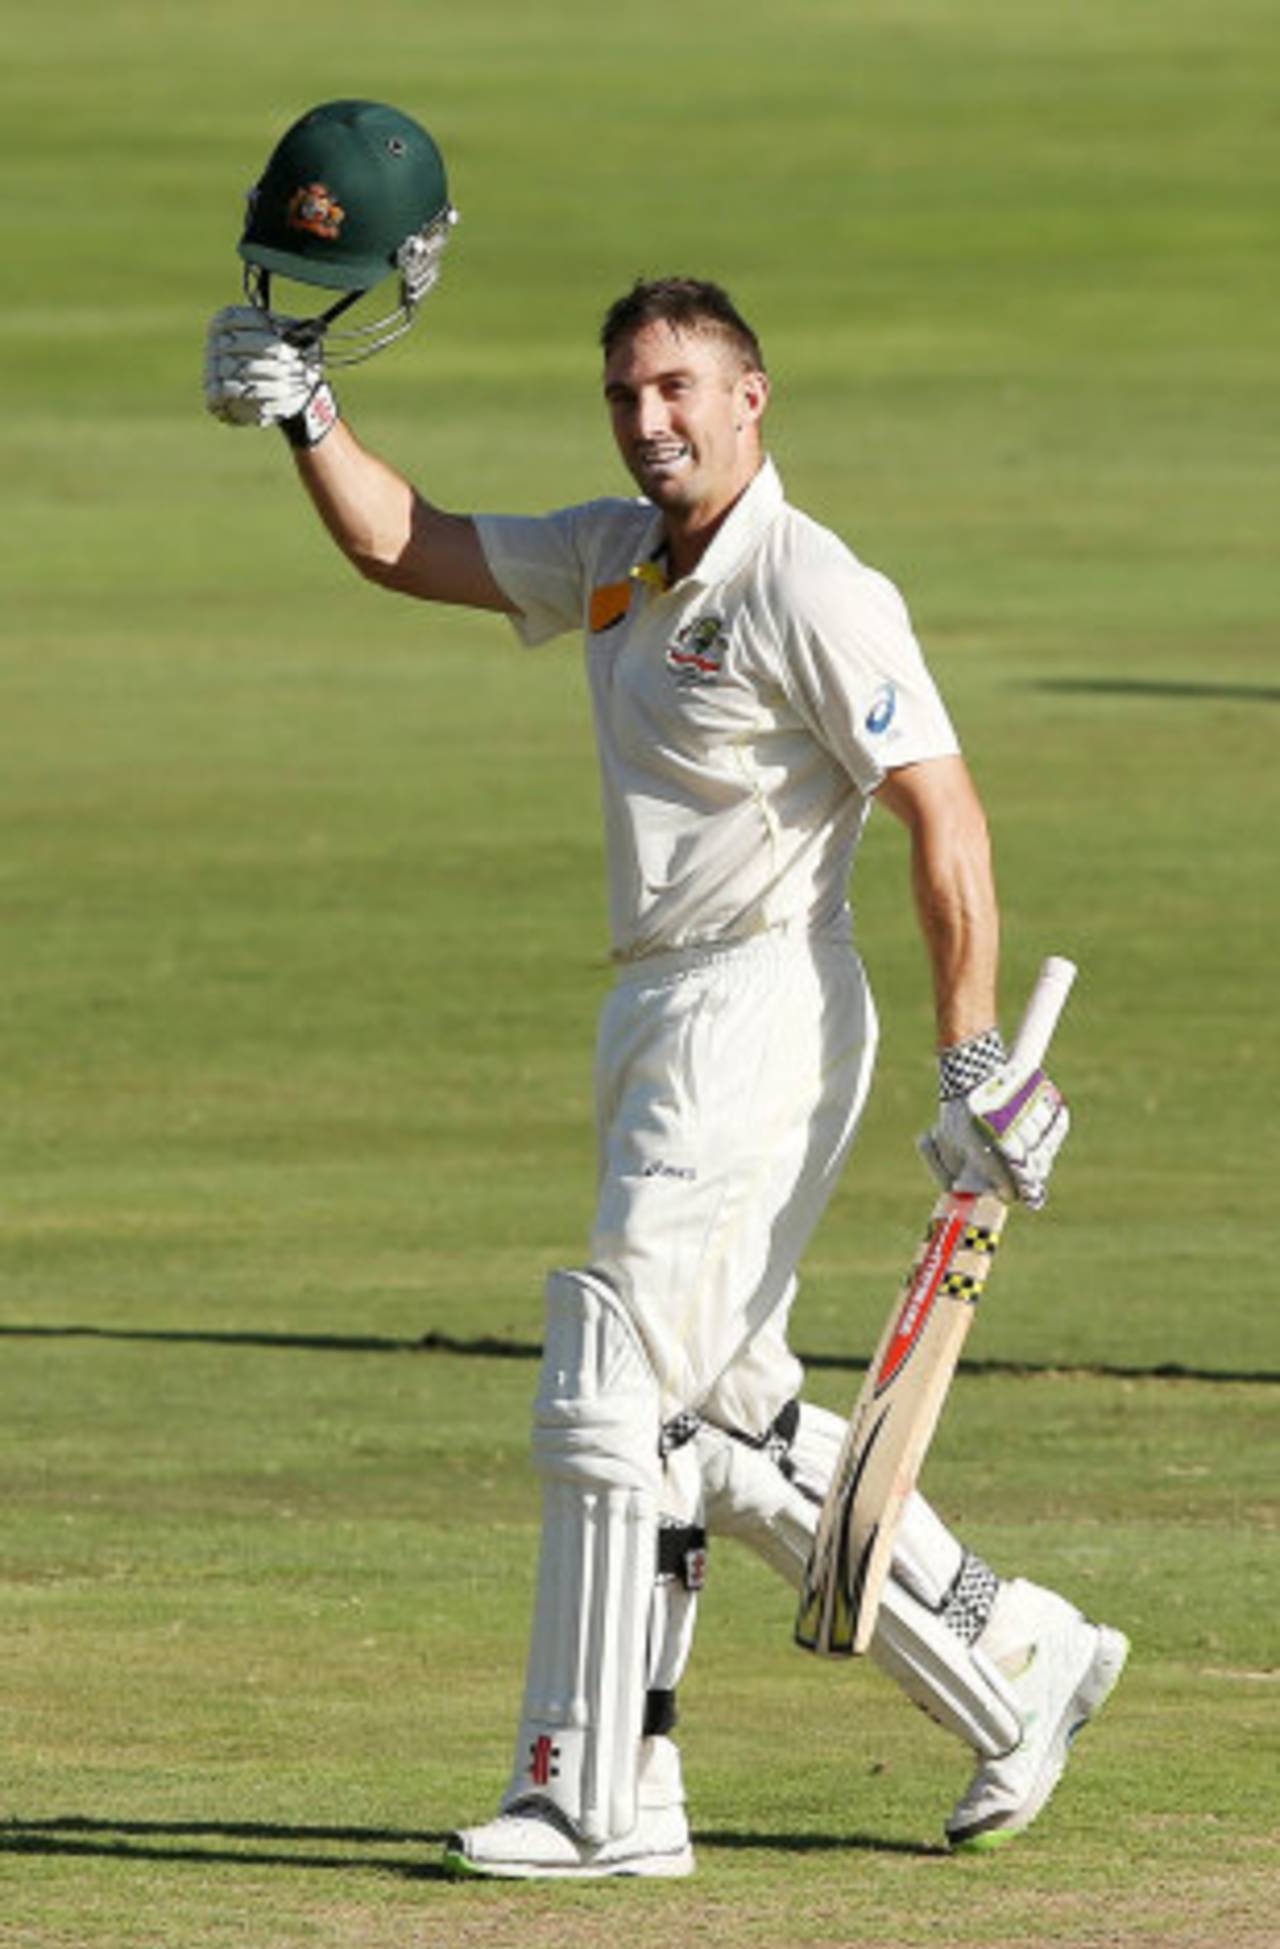 Five days ago Shaun Marsh was sitting on his couch at home in Perth, now he is a Test centurion again&nbsp;&nbsp;&bull;&nbsp;&nbsp;Getty Images